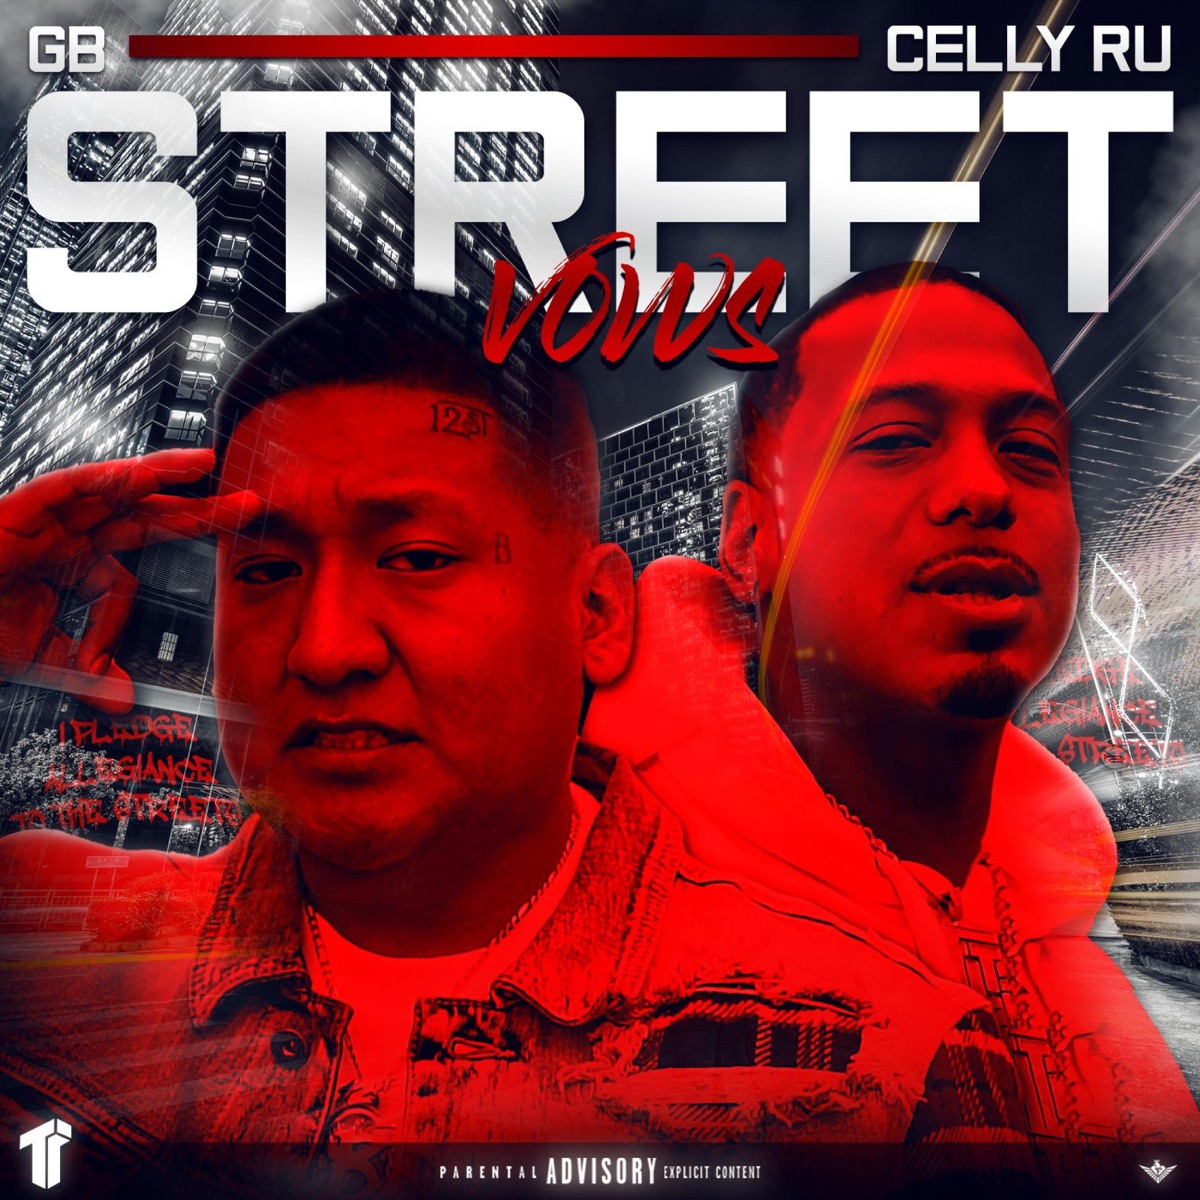 Street Vows (feat. Celly Ru) - Single - Album by GB - Apple Music